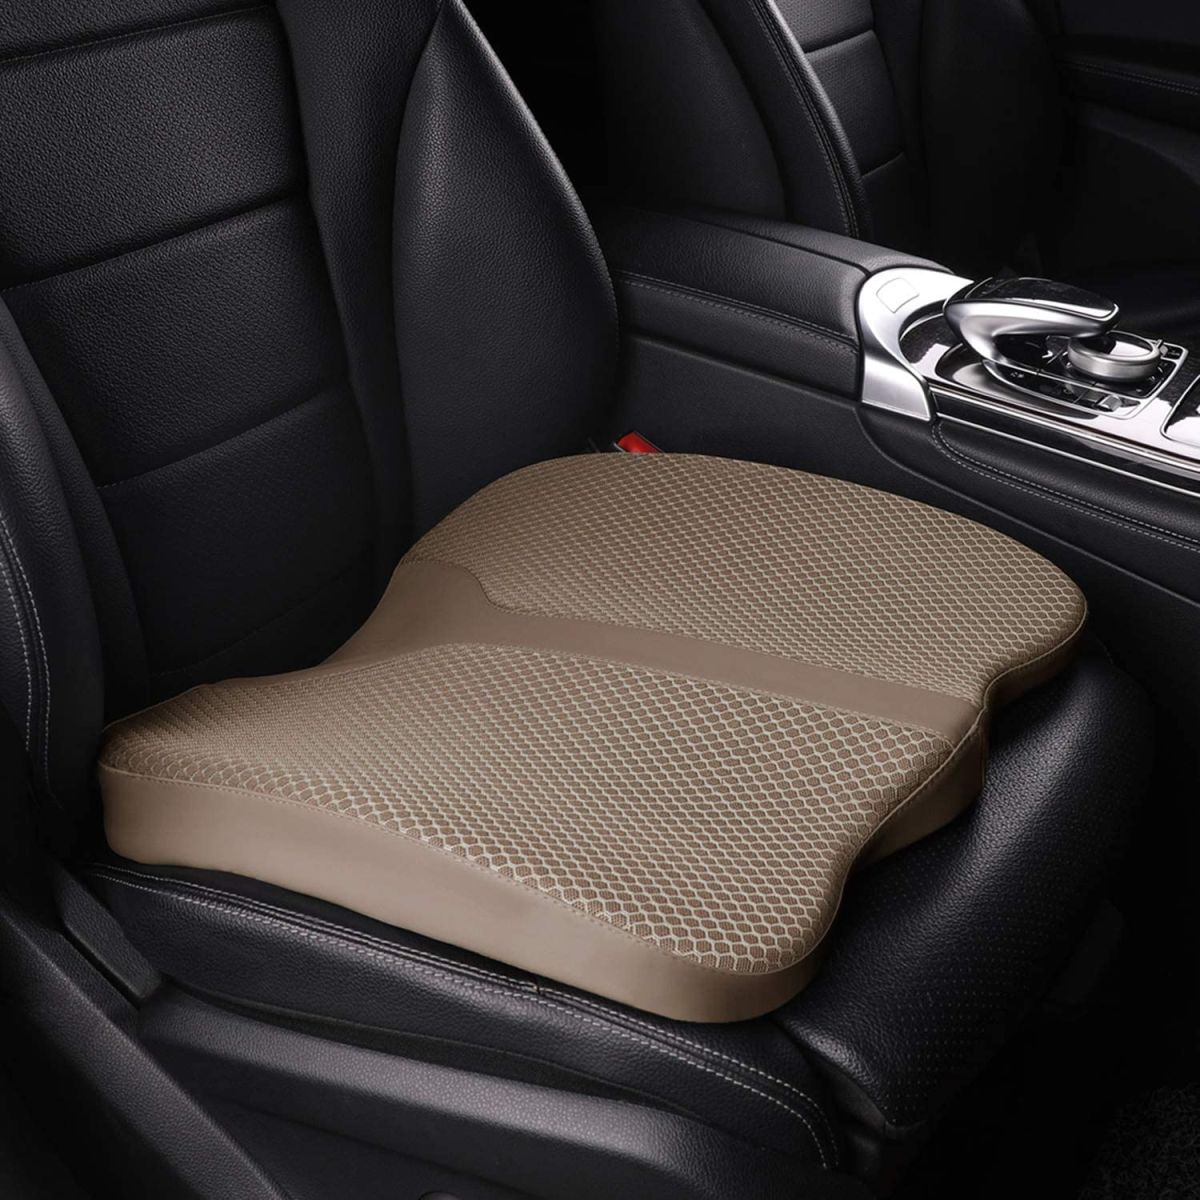 Comfort Memory Foam Seat Cushion for Car Seat Driver, Tailbone (Coccyx) Pain Relief Pad for Driving, Office Chair (Beige)